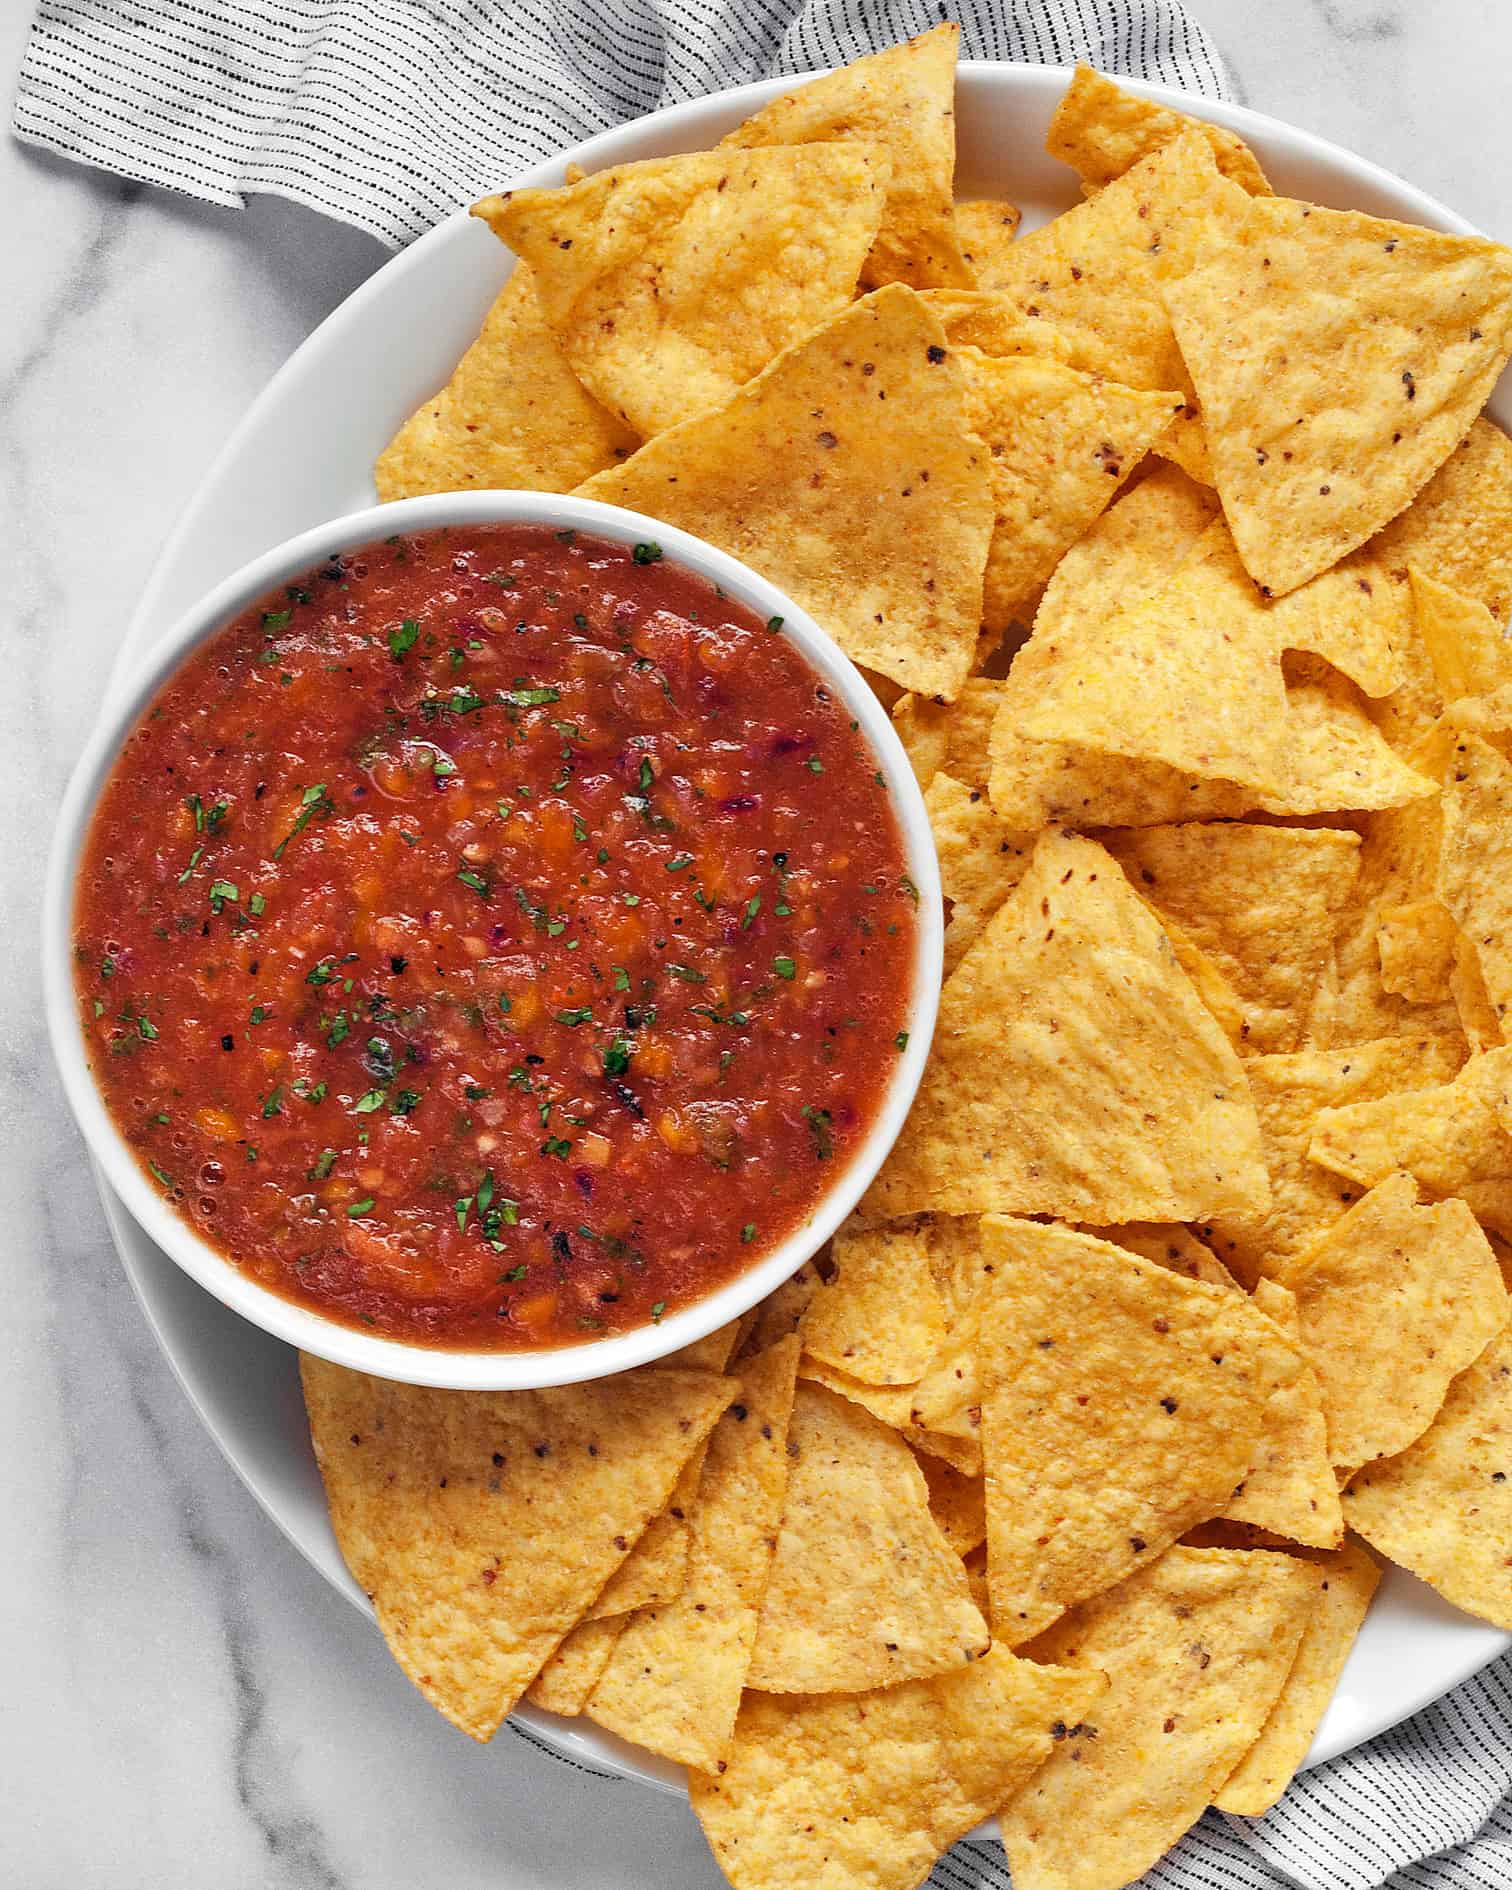 Mango habanero salsa in a bowl with chips on a plate